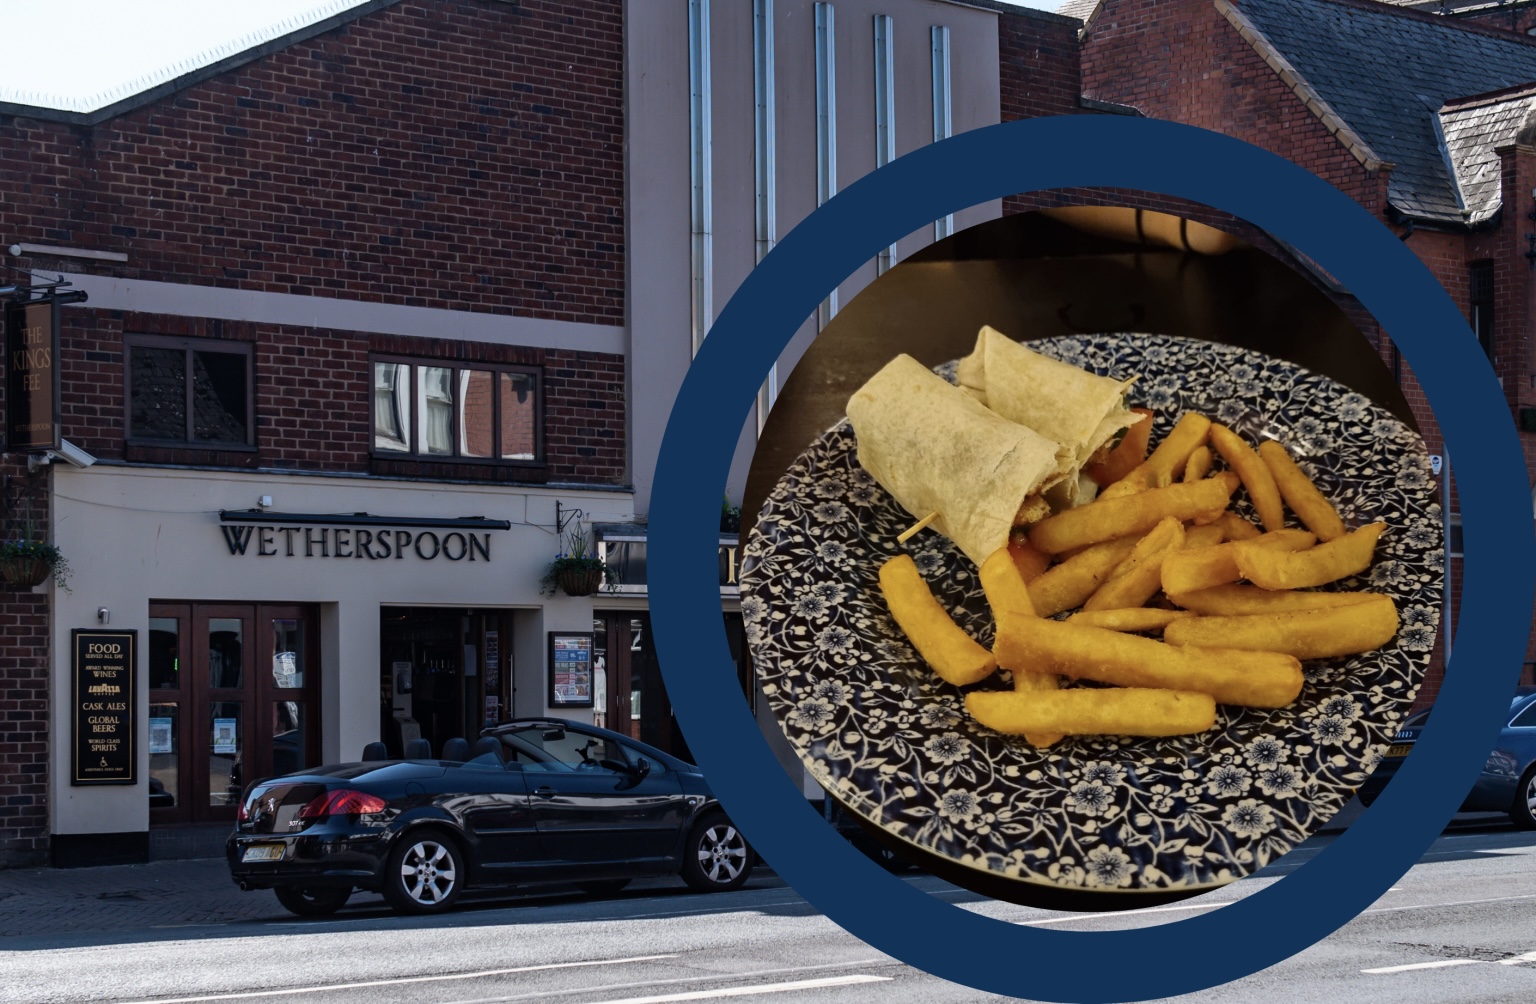 NEWS | Wetherspoons paltry chip count group goes viral as members of the public take tape measures and photos of their food